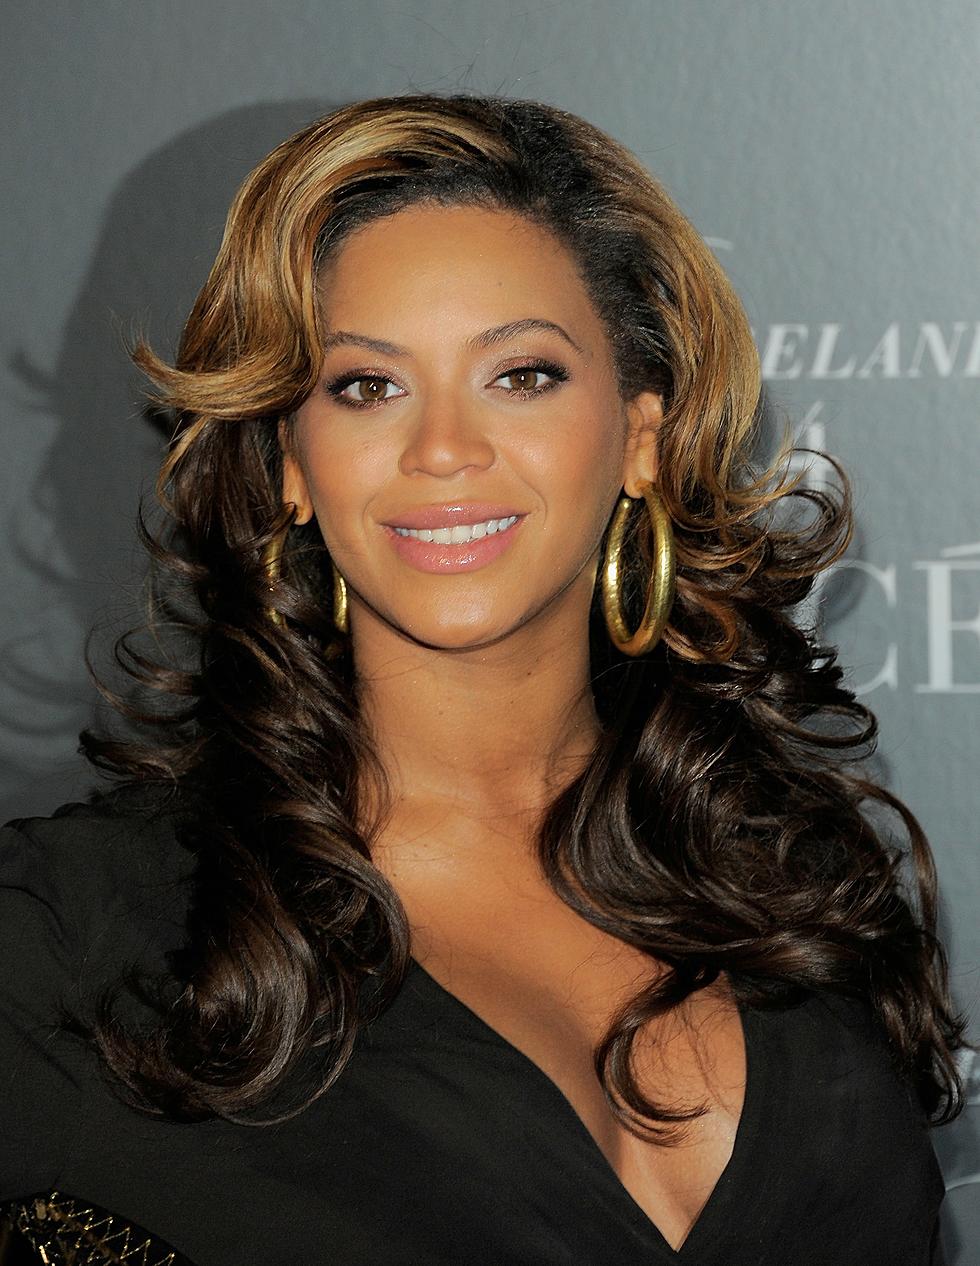 Rumor or Real: Rutgers’ University Offers Beyoncé Course?